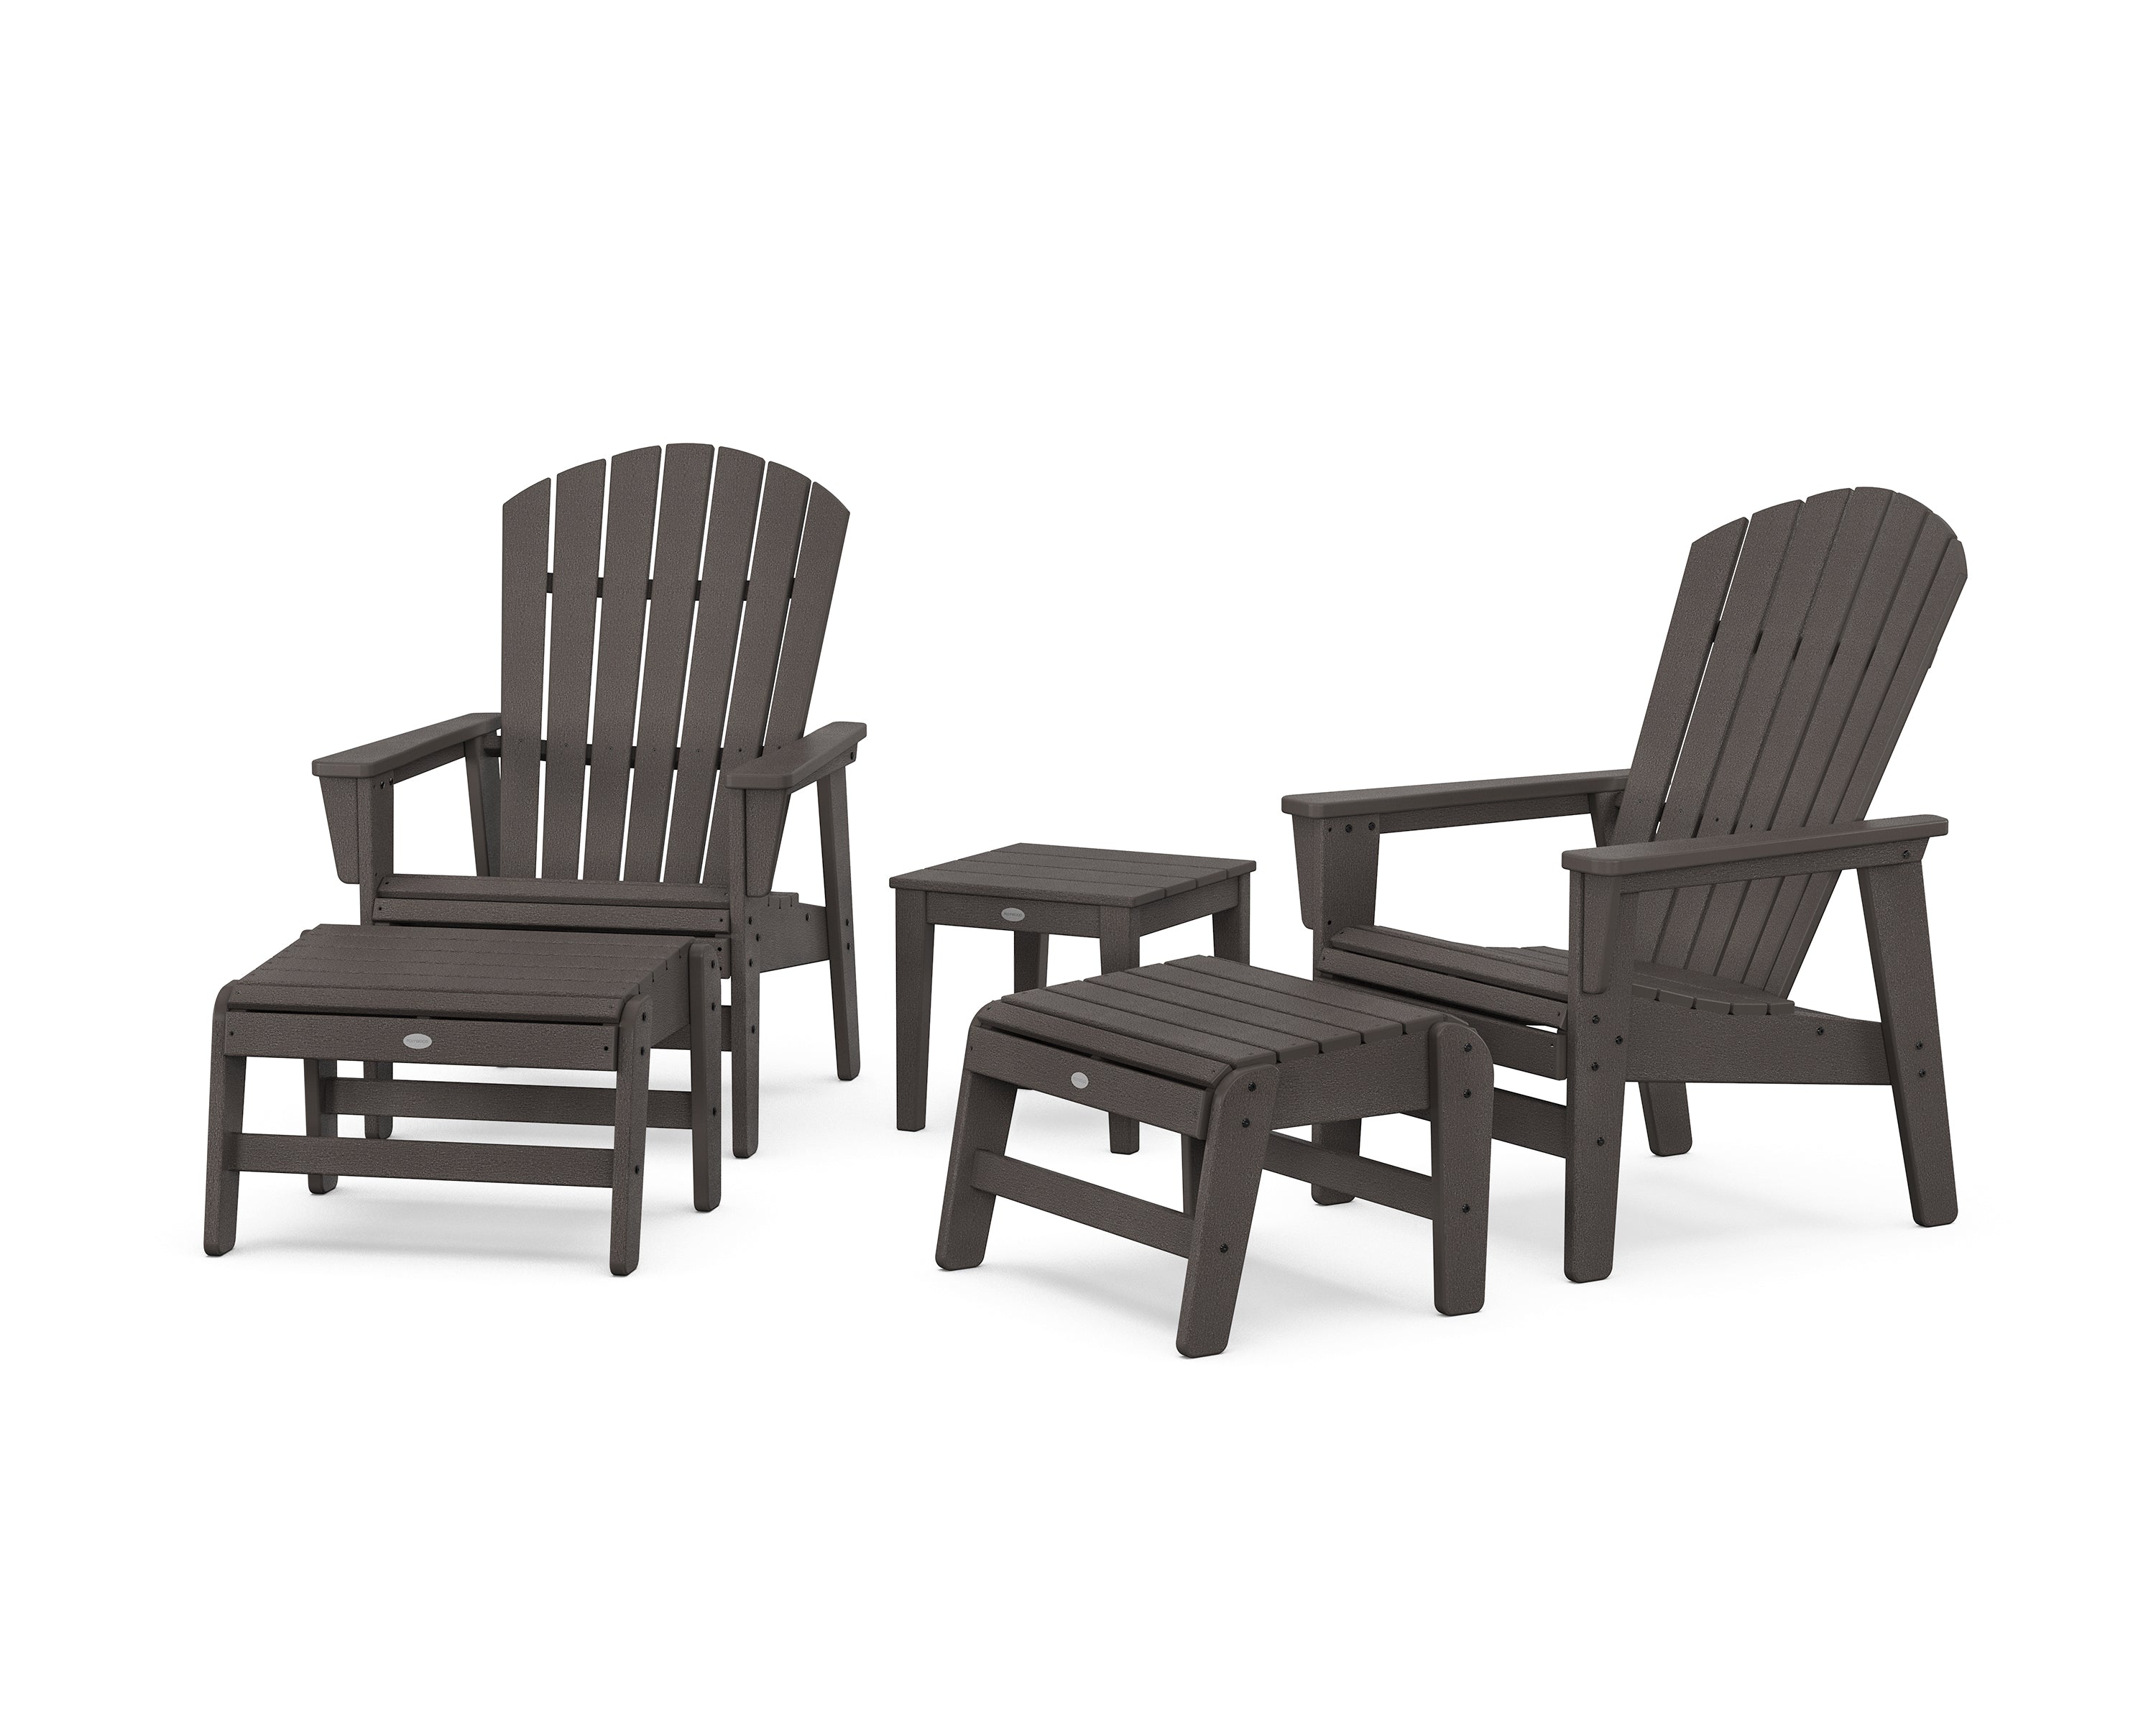 POLYWOOD® 5-Piece Nautical Grand Upright Adirondack Set with Ottomans and Side Table in Vintage Coffee